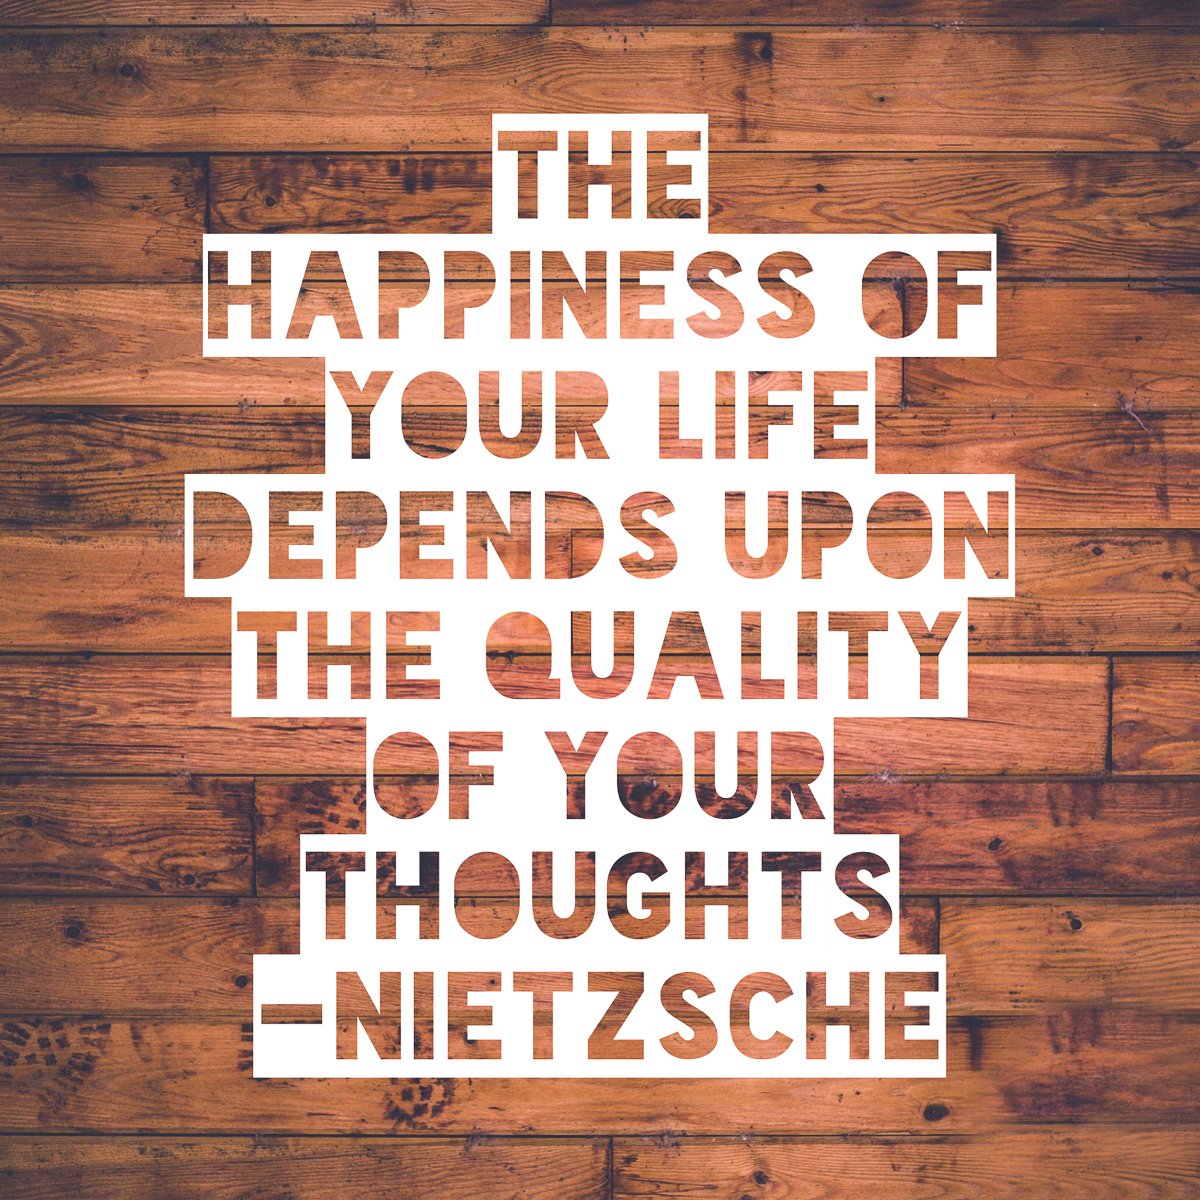 The happiness of your life depends upon the quality of your thoughts: